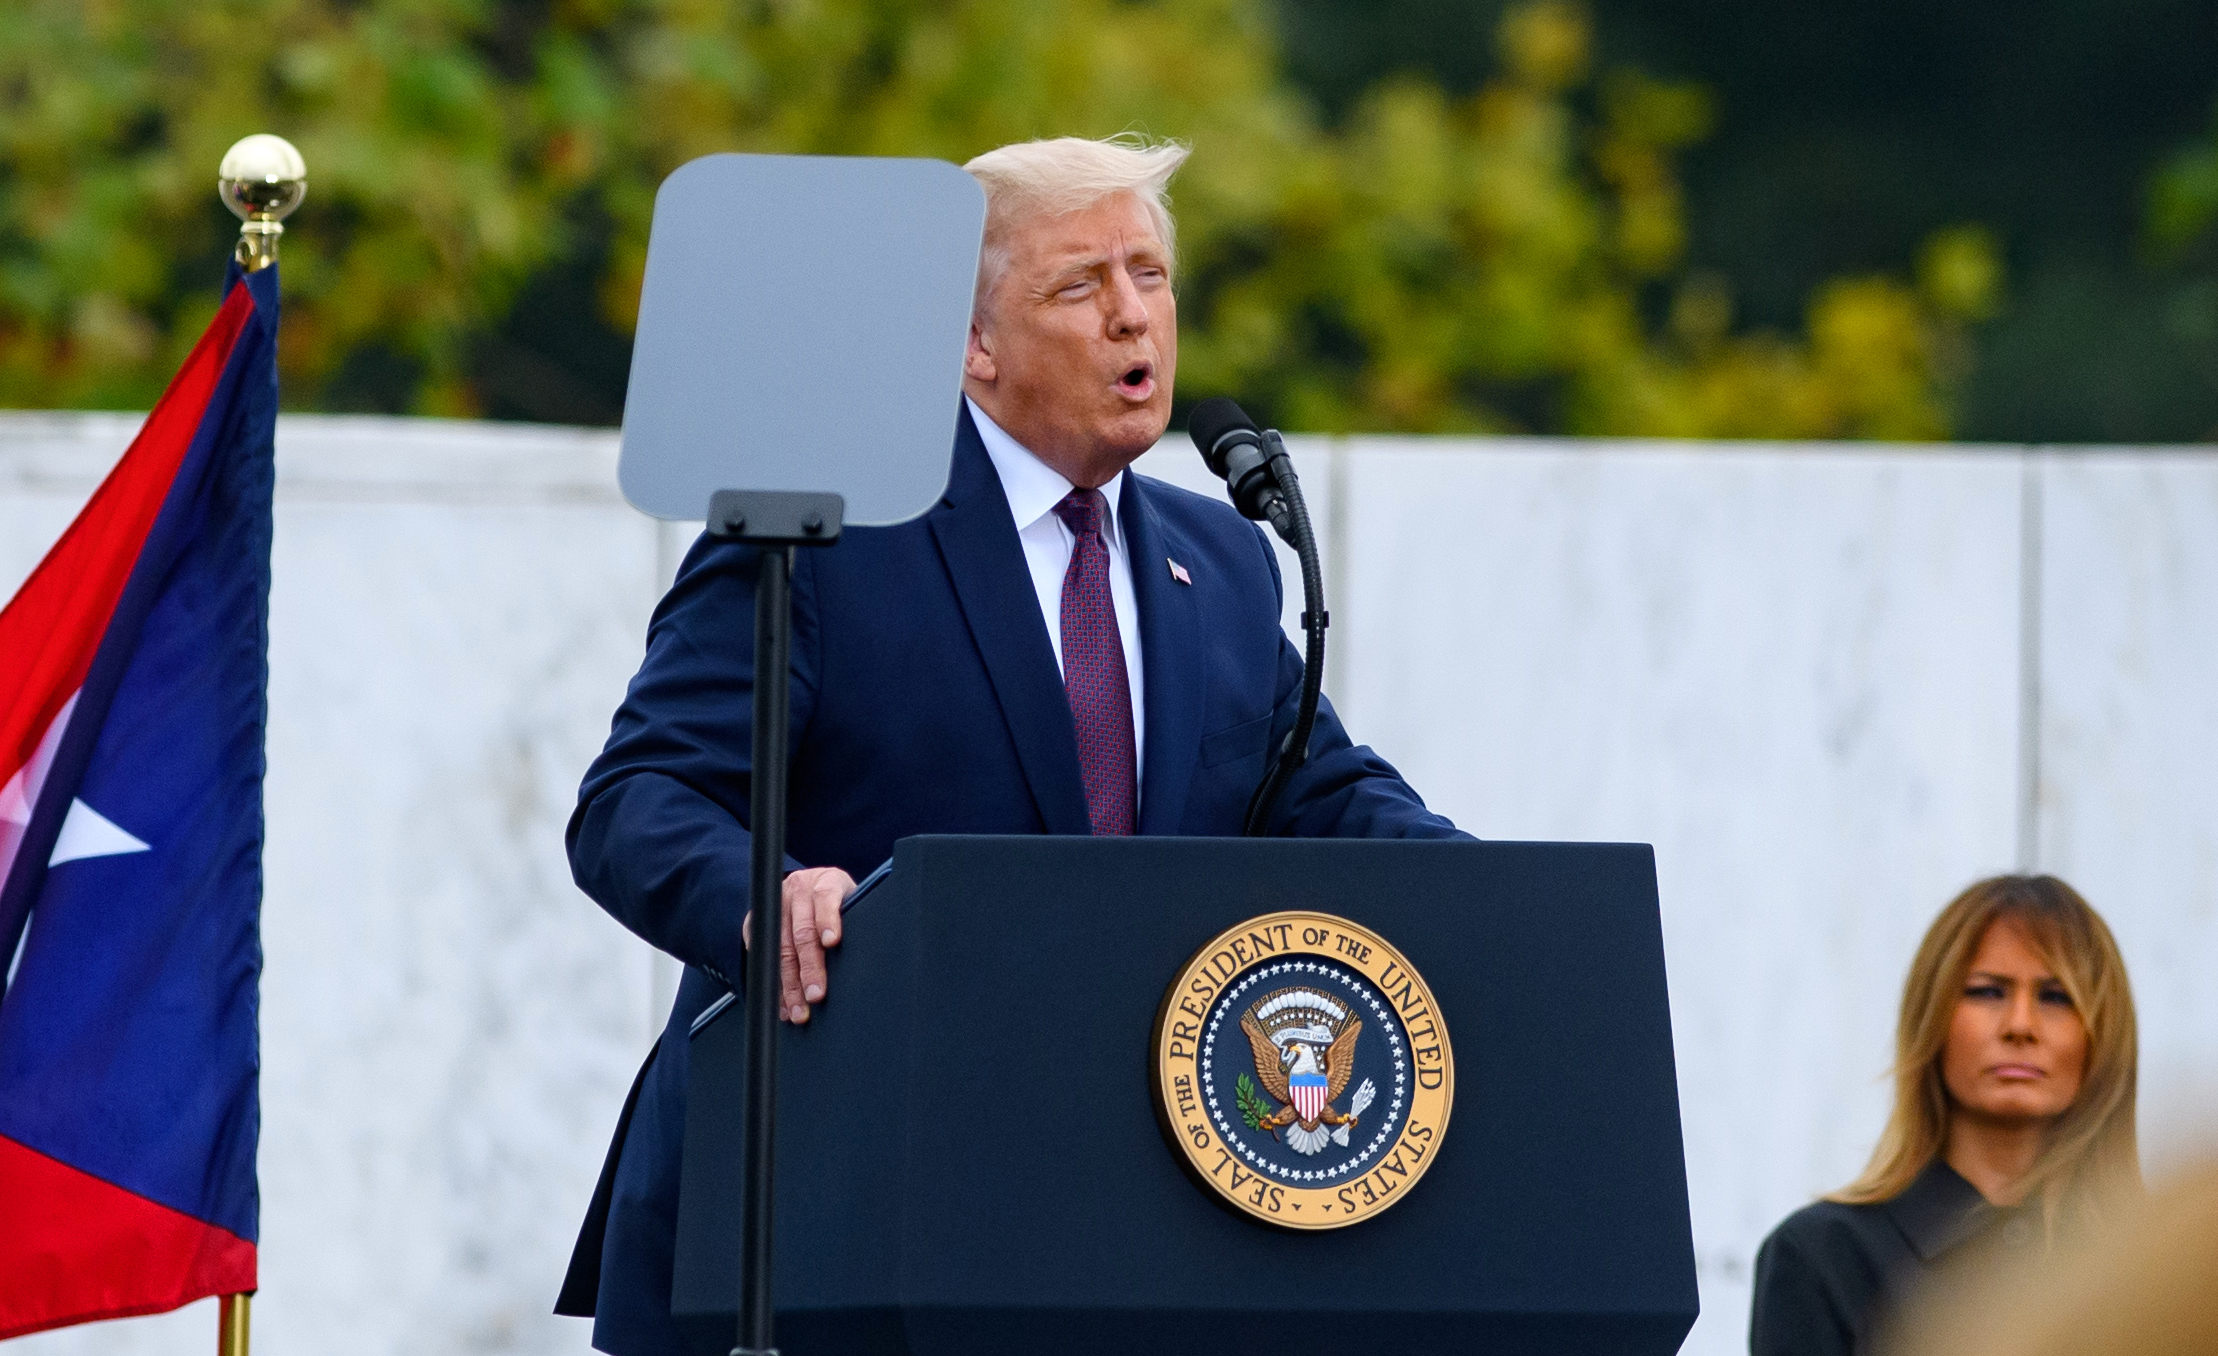 PHOTO: President Donald Trump delivers remarks during a ceremony at the Flight 93 National Memorial commemorating the 19th anniversary of the crash of Flight 93 and the September 11th terrorist attacks on Sept. 11, 2020, in Shanksville, Pa.